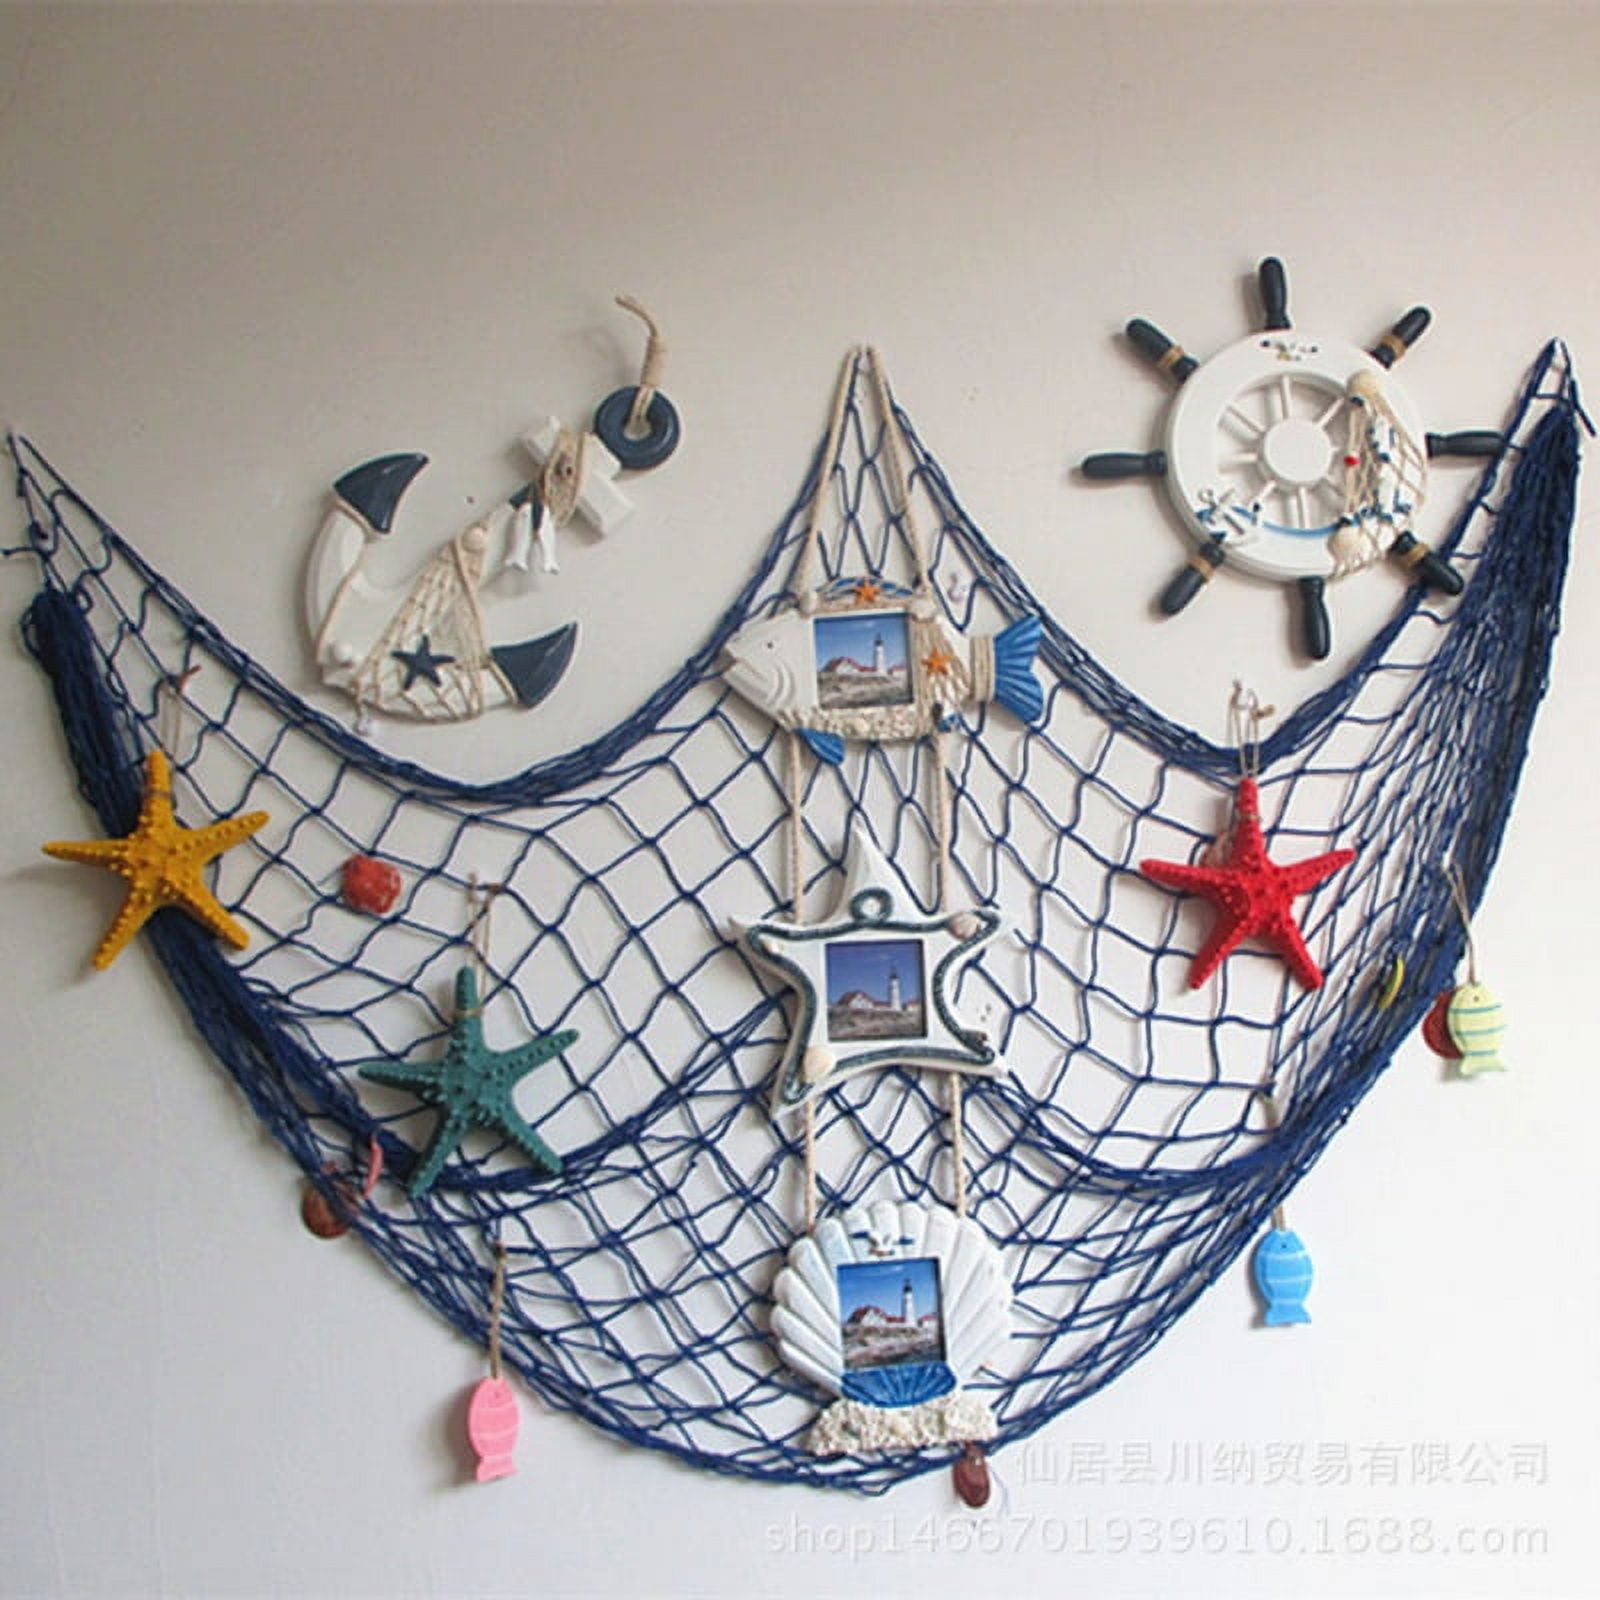 Blue Fishing Net Beach Theme Decor for Party Home Living Room